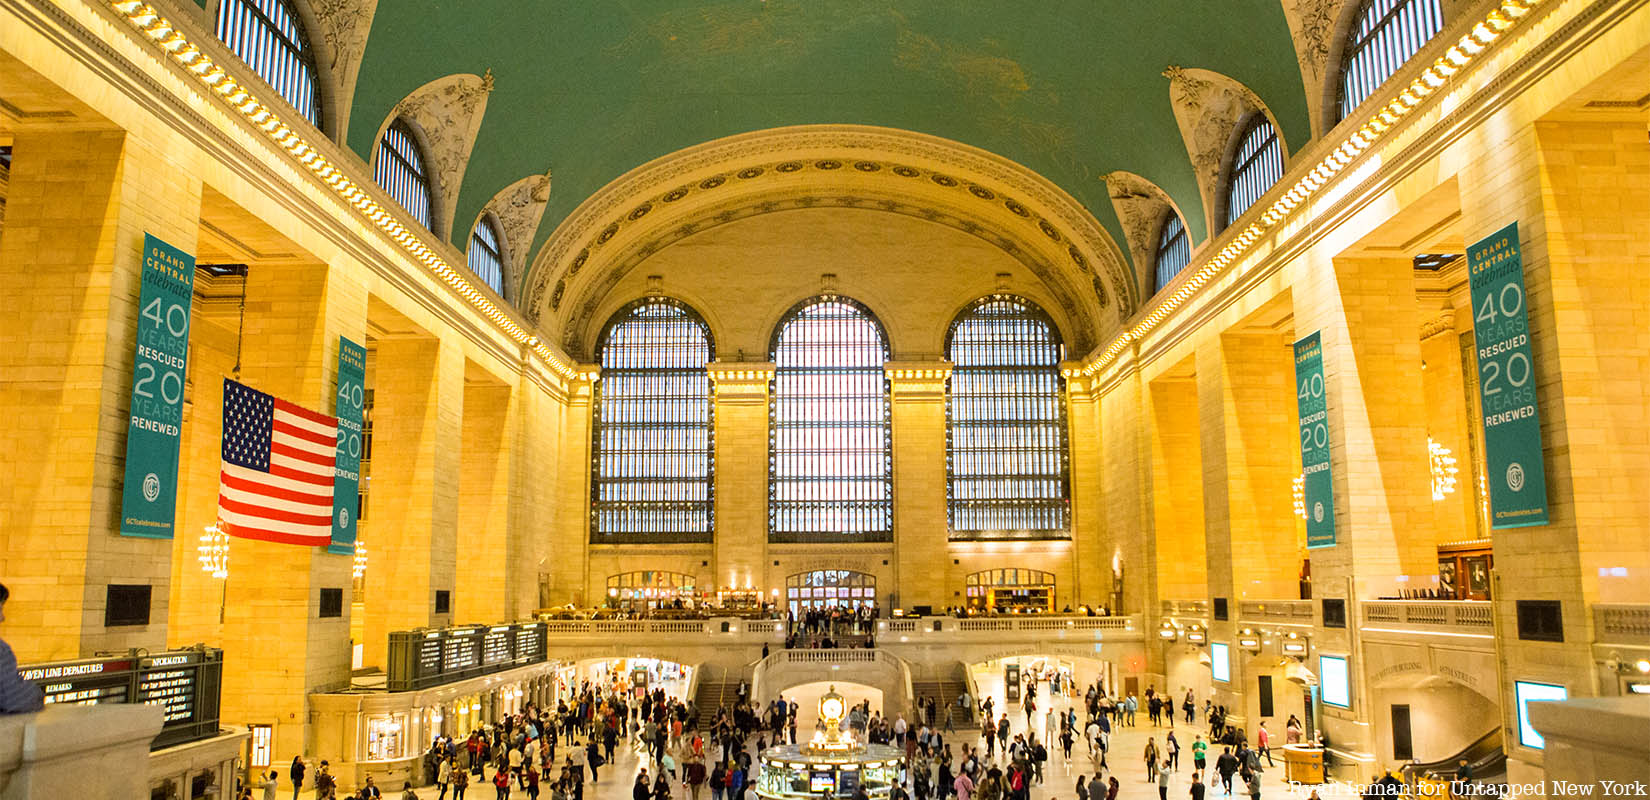 who built grand central station in new york